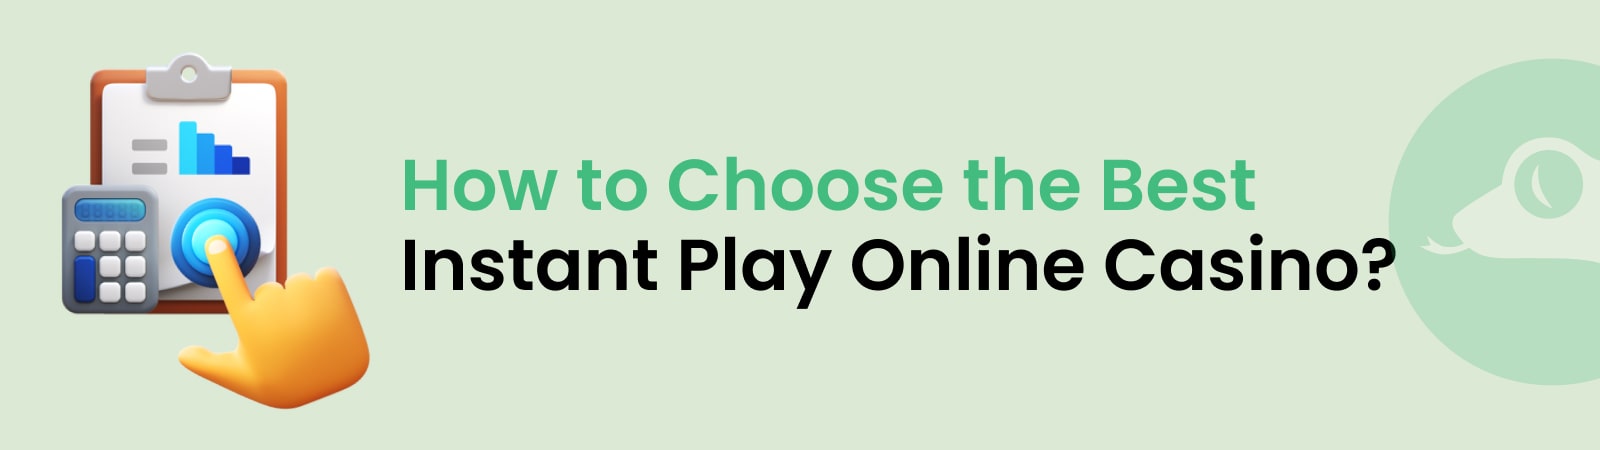 how to choose the best instant play online casino